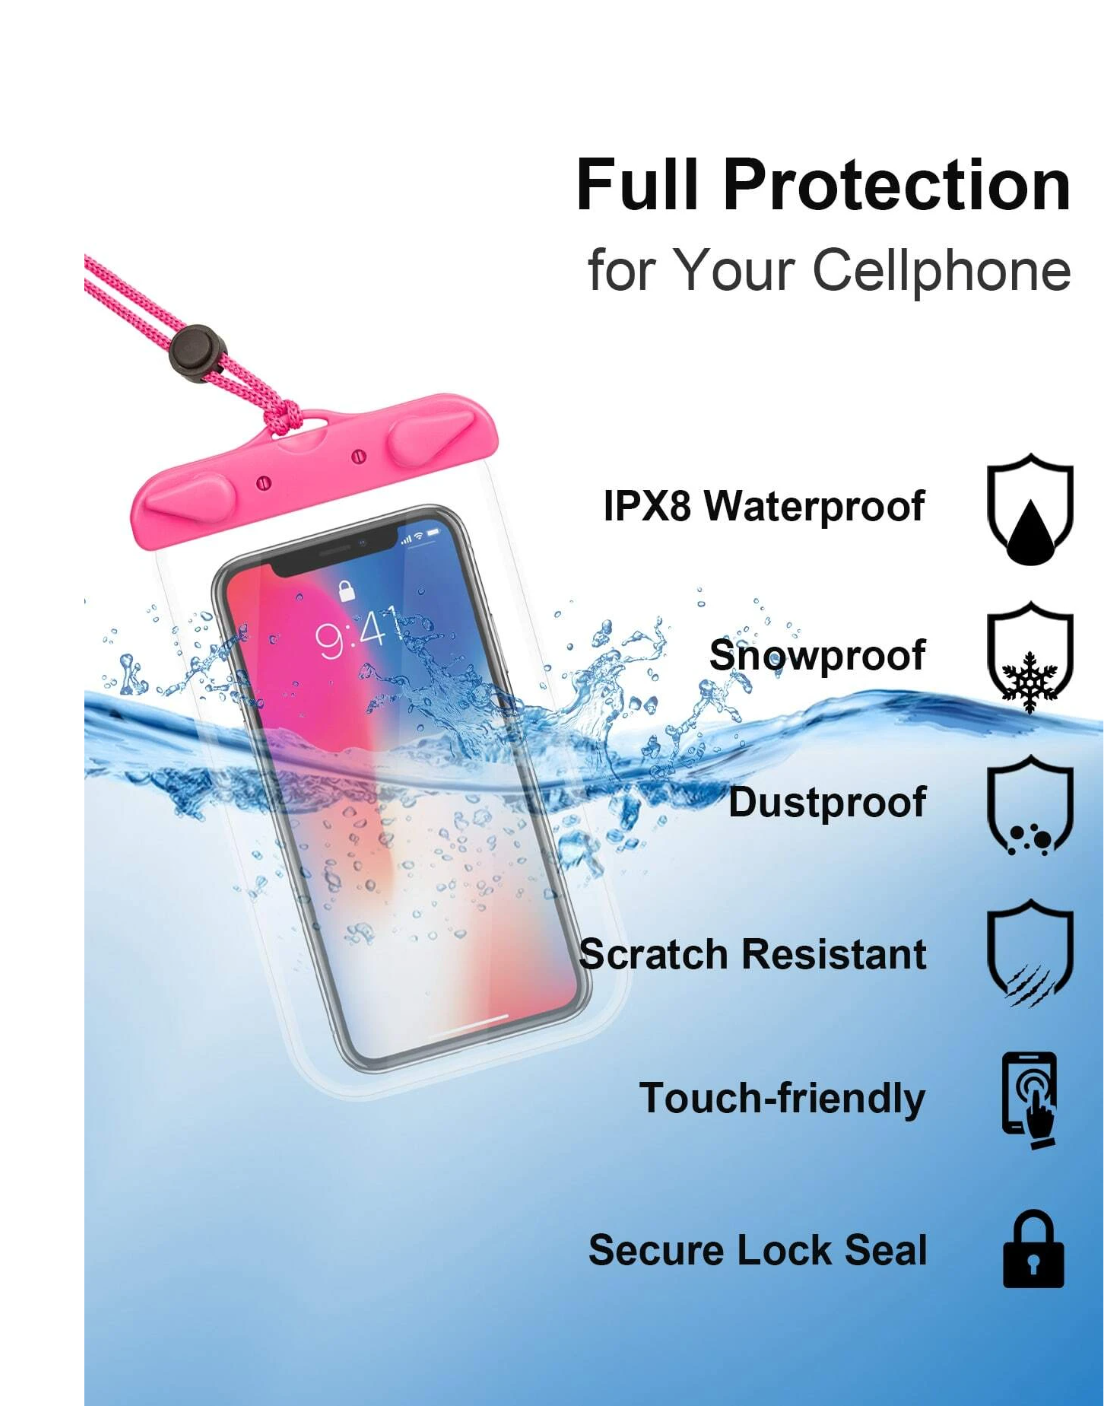 Aquashield Duo: 2pcs Clear Waterproof Phone Bags with Stylish Lanyards – Dive into Ultimate Protection!